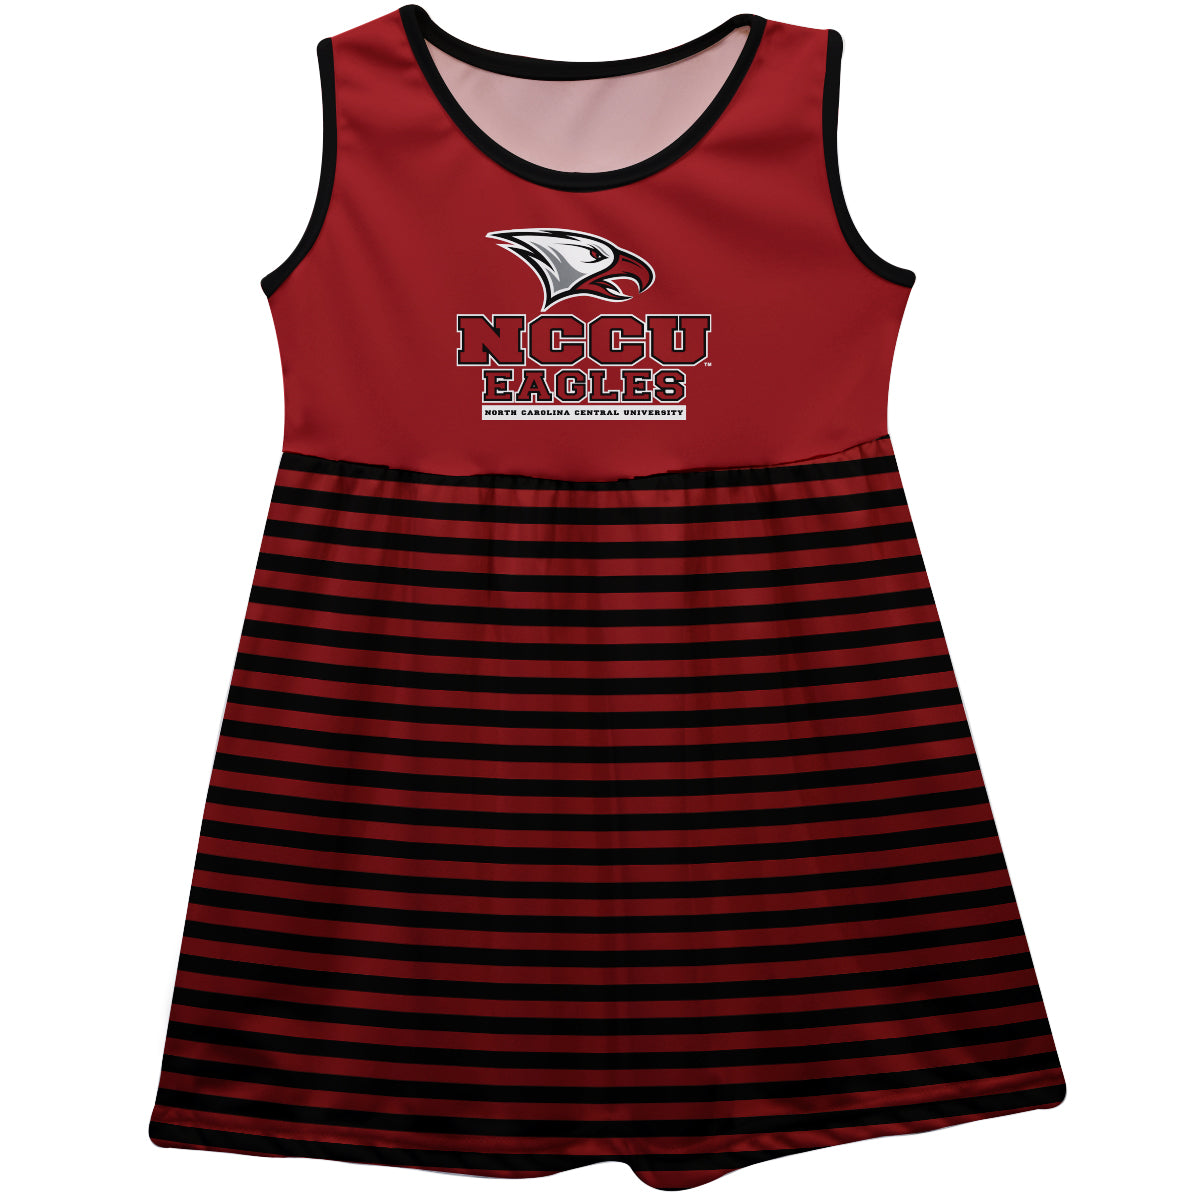 NCCU Eagles Girls Game Day Sleeveless Tank Dress Solid Maroon Logo Stripes on Skirt by Vive La Fete-Campus-Wardrobe